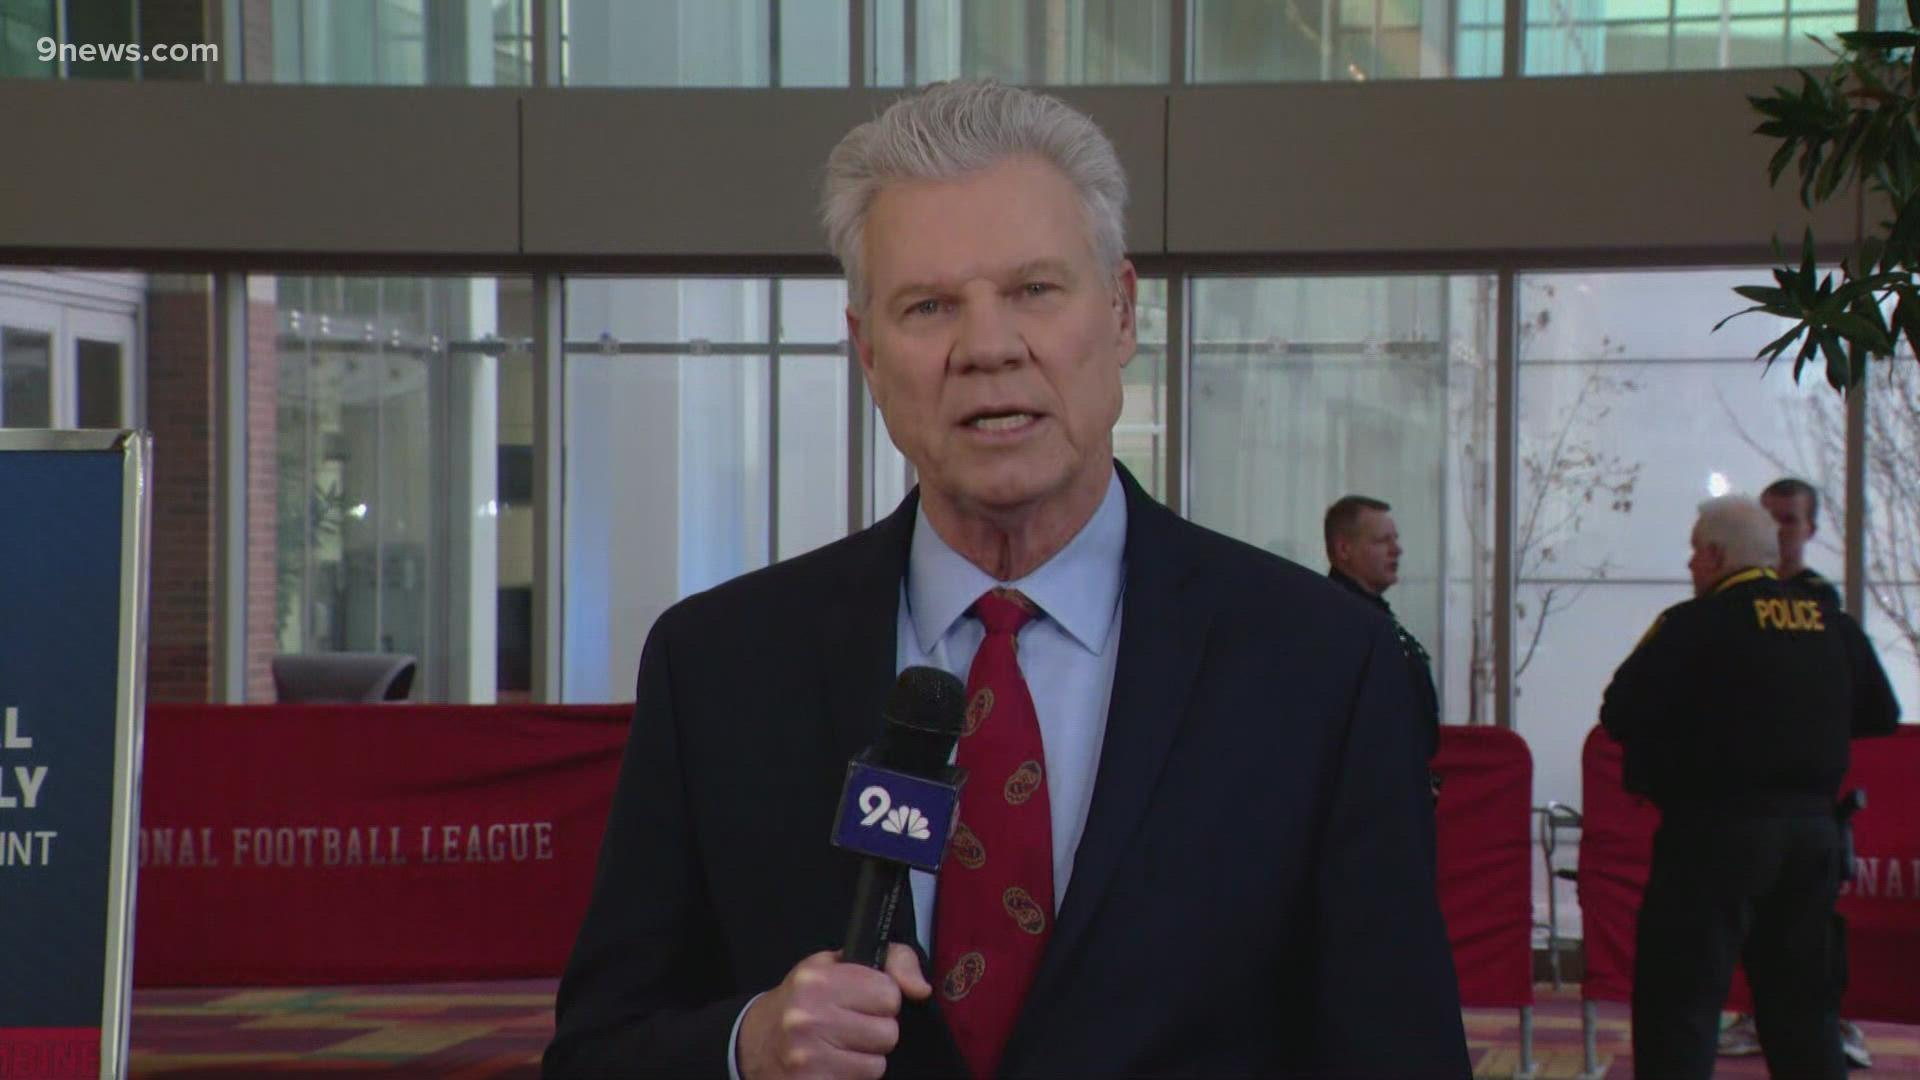 Broncos Insider Mike Klis has an update from the NFL Combine in Indianapolis where the Denver Broncos will get a look at quarterback prospects.